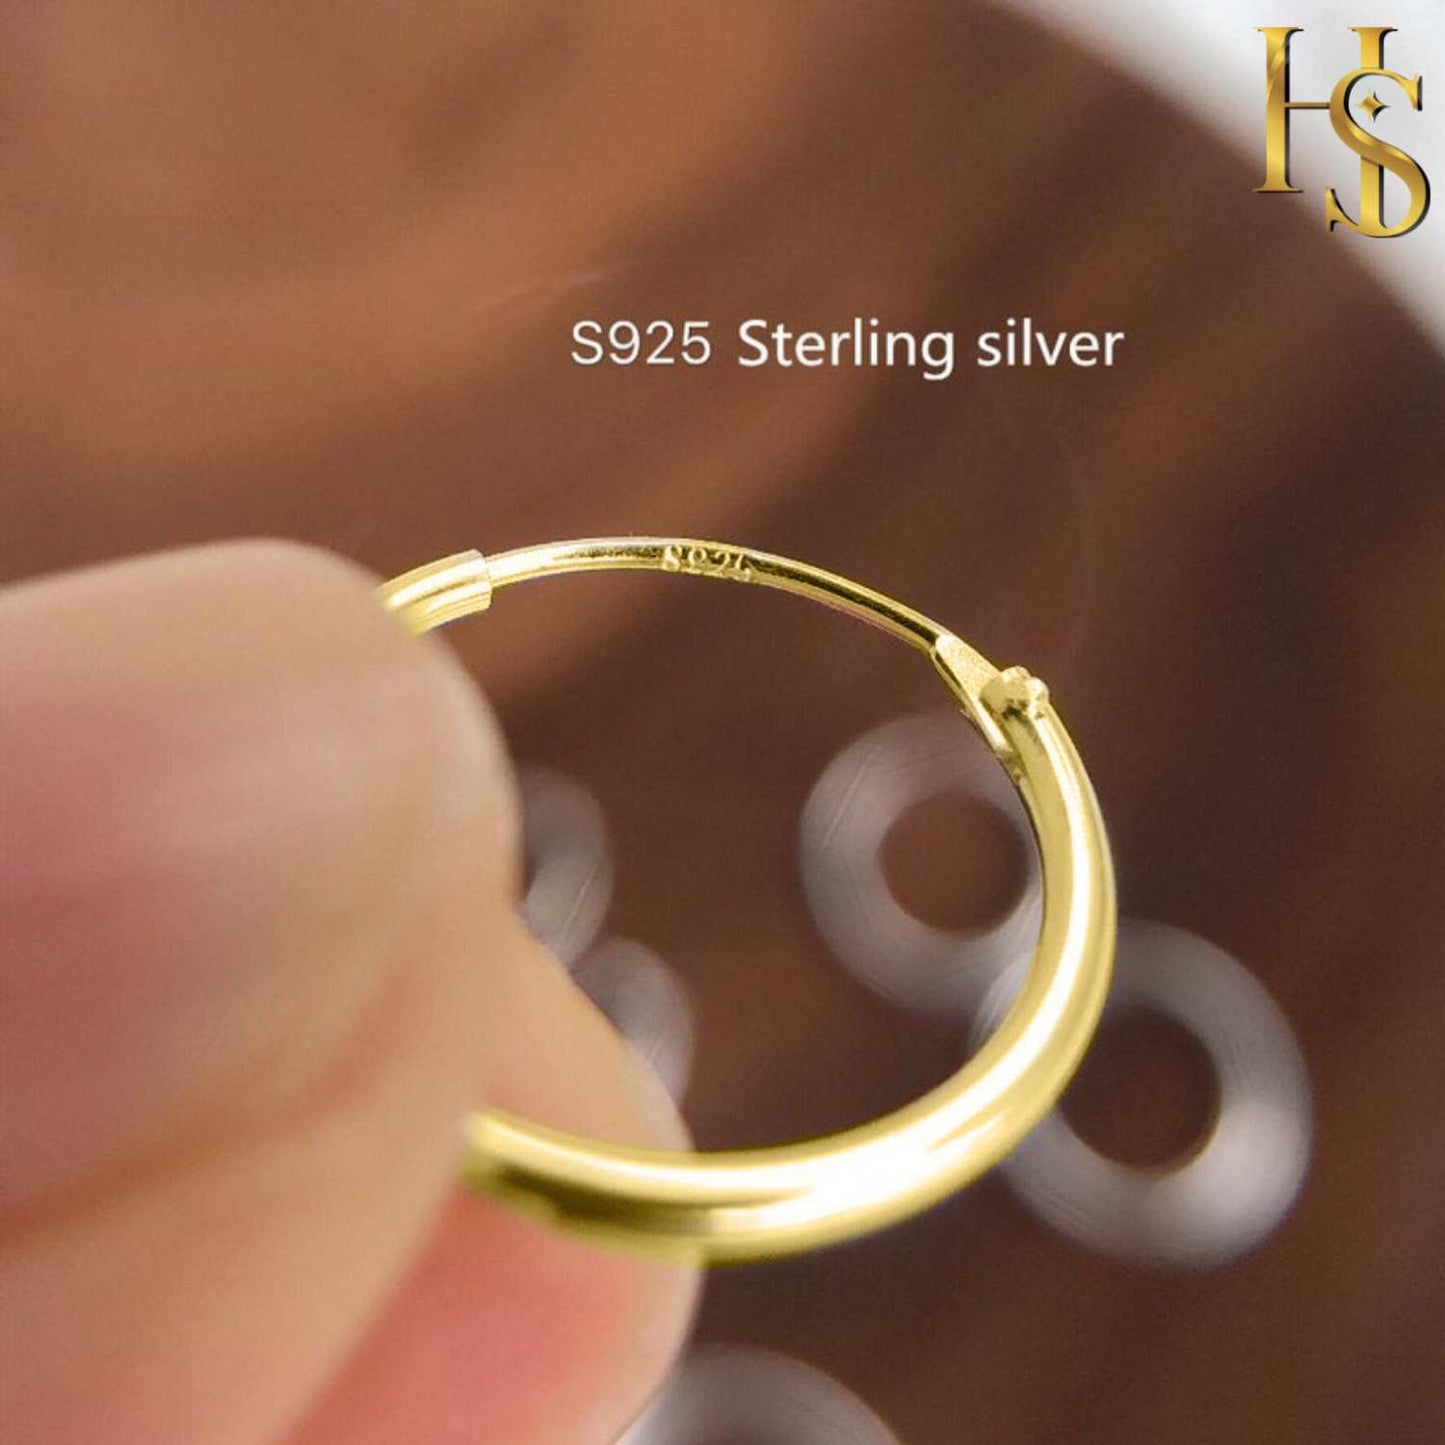 Classic Gold Hoop Earrings in 92.5 Silver - 1.2mm Thickness - Big Sizes 25mm to 50mm -  18K Gold finish